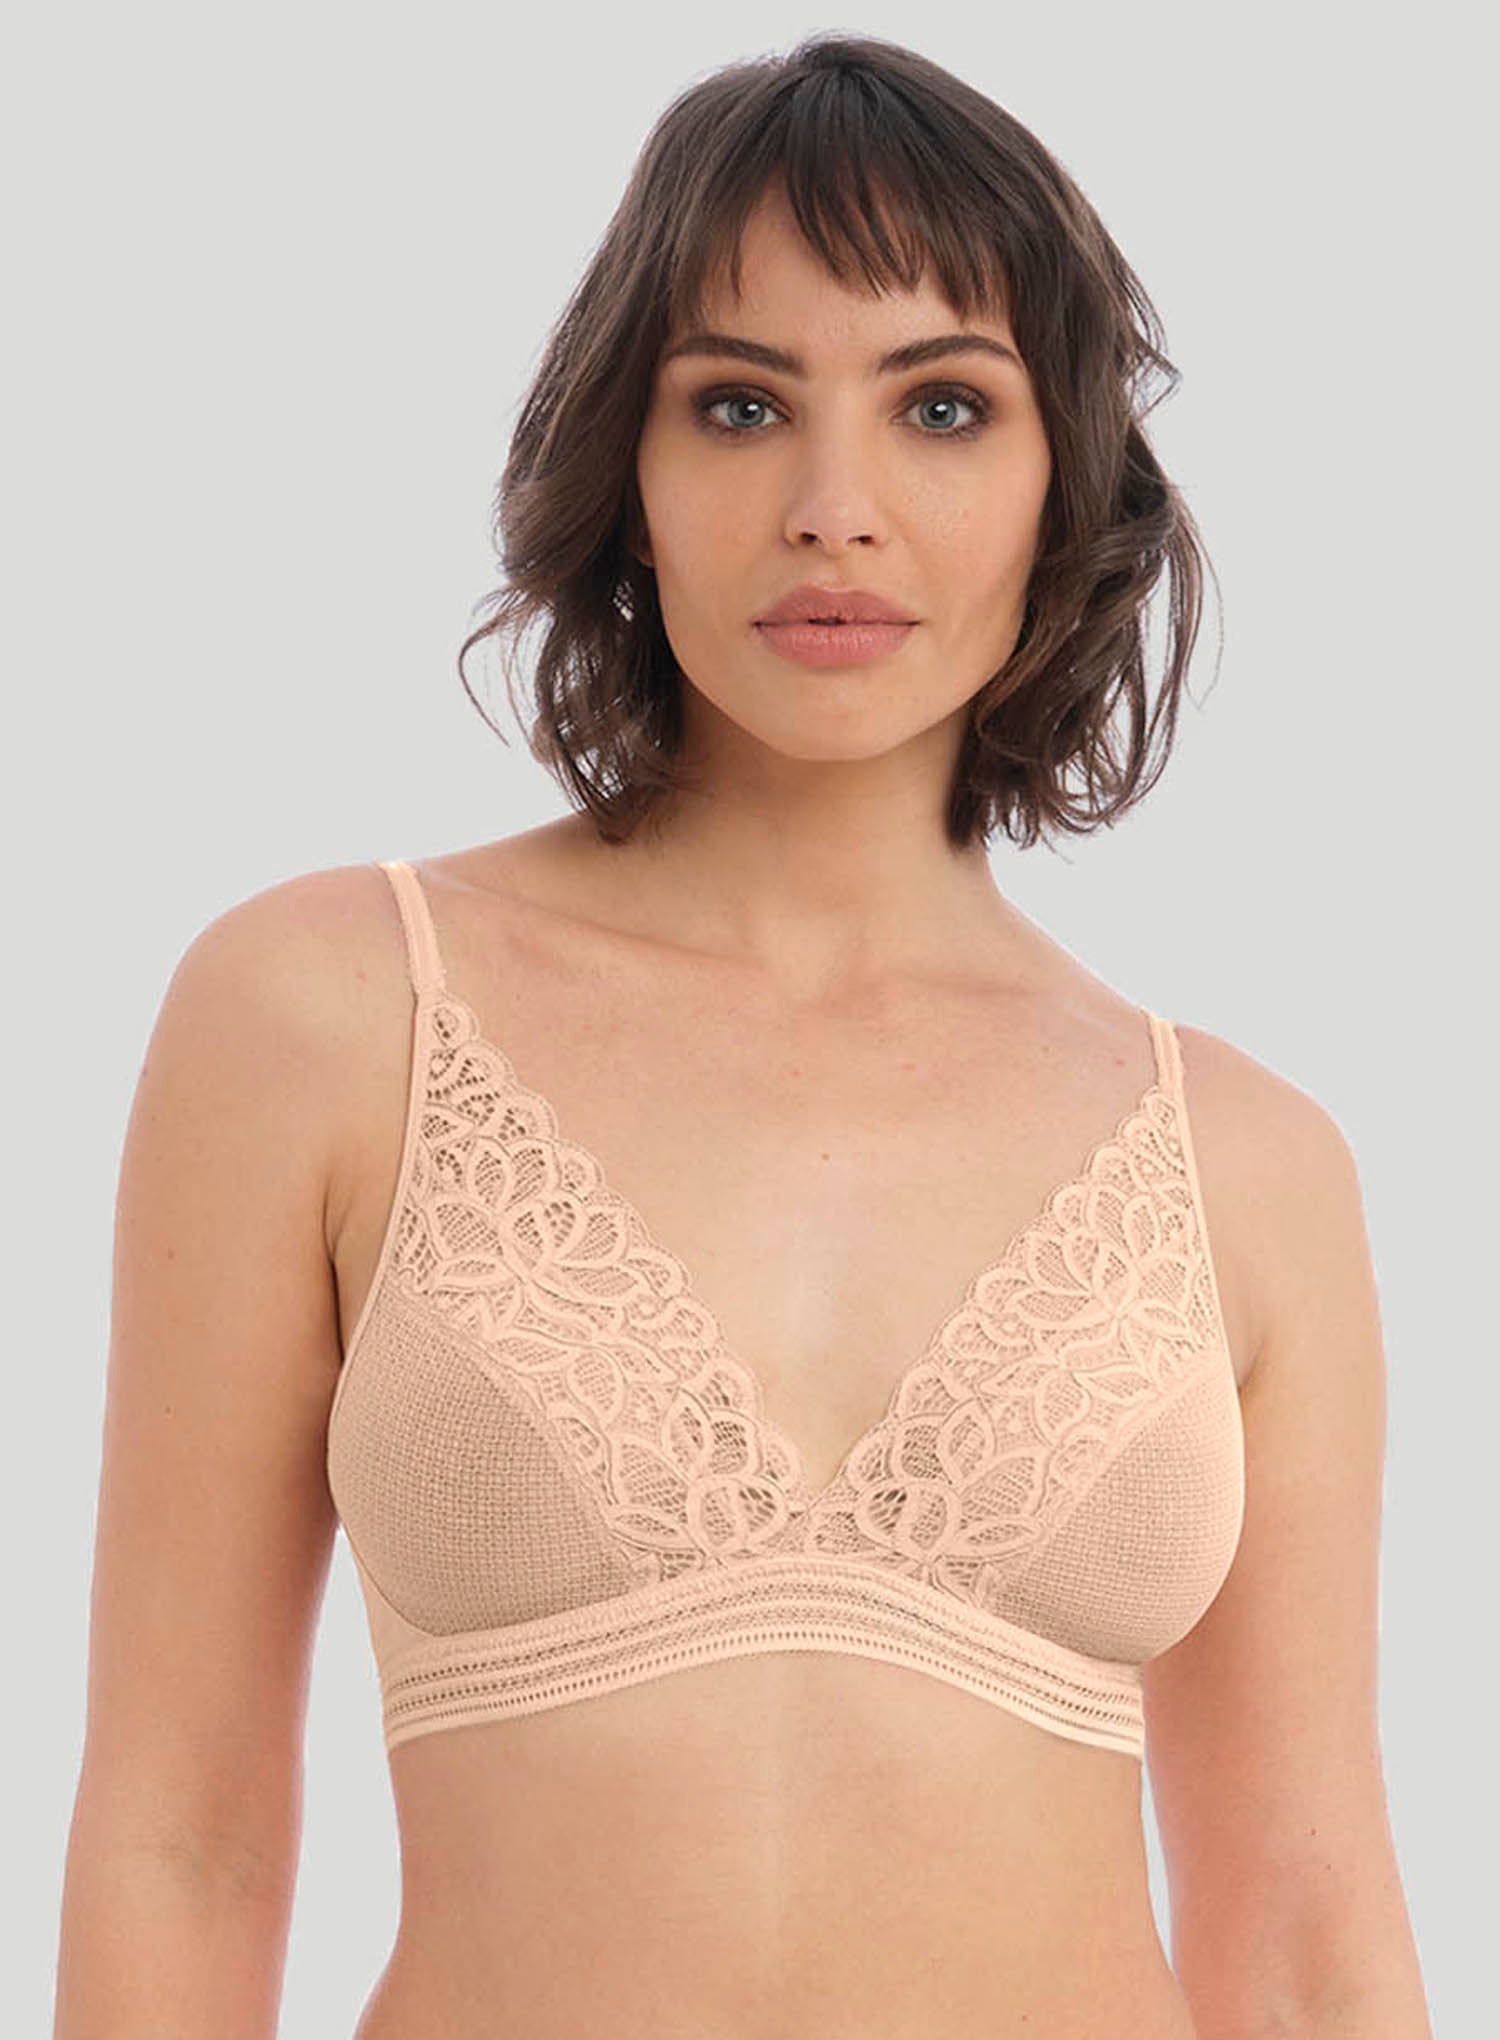 Push-up bra by Wacoal that can give ANYONE cleavage launched with